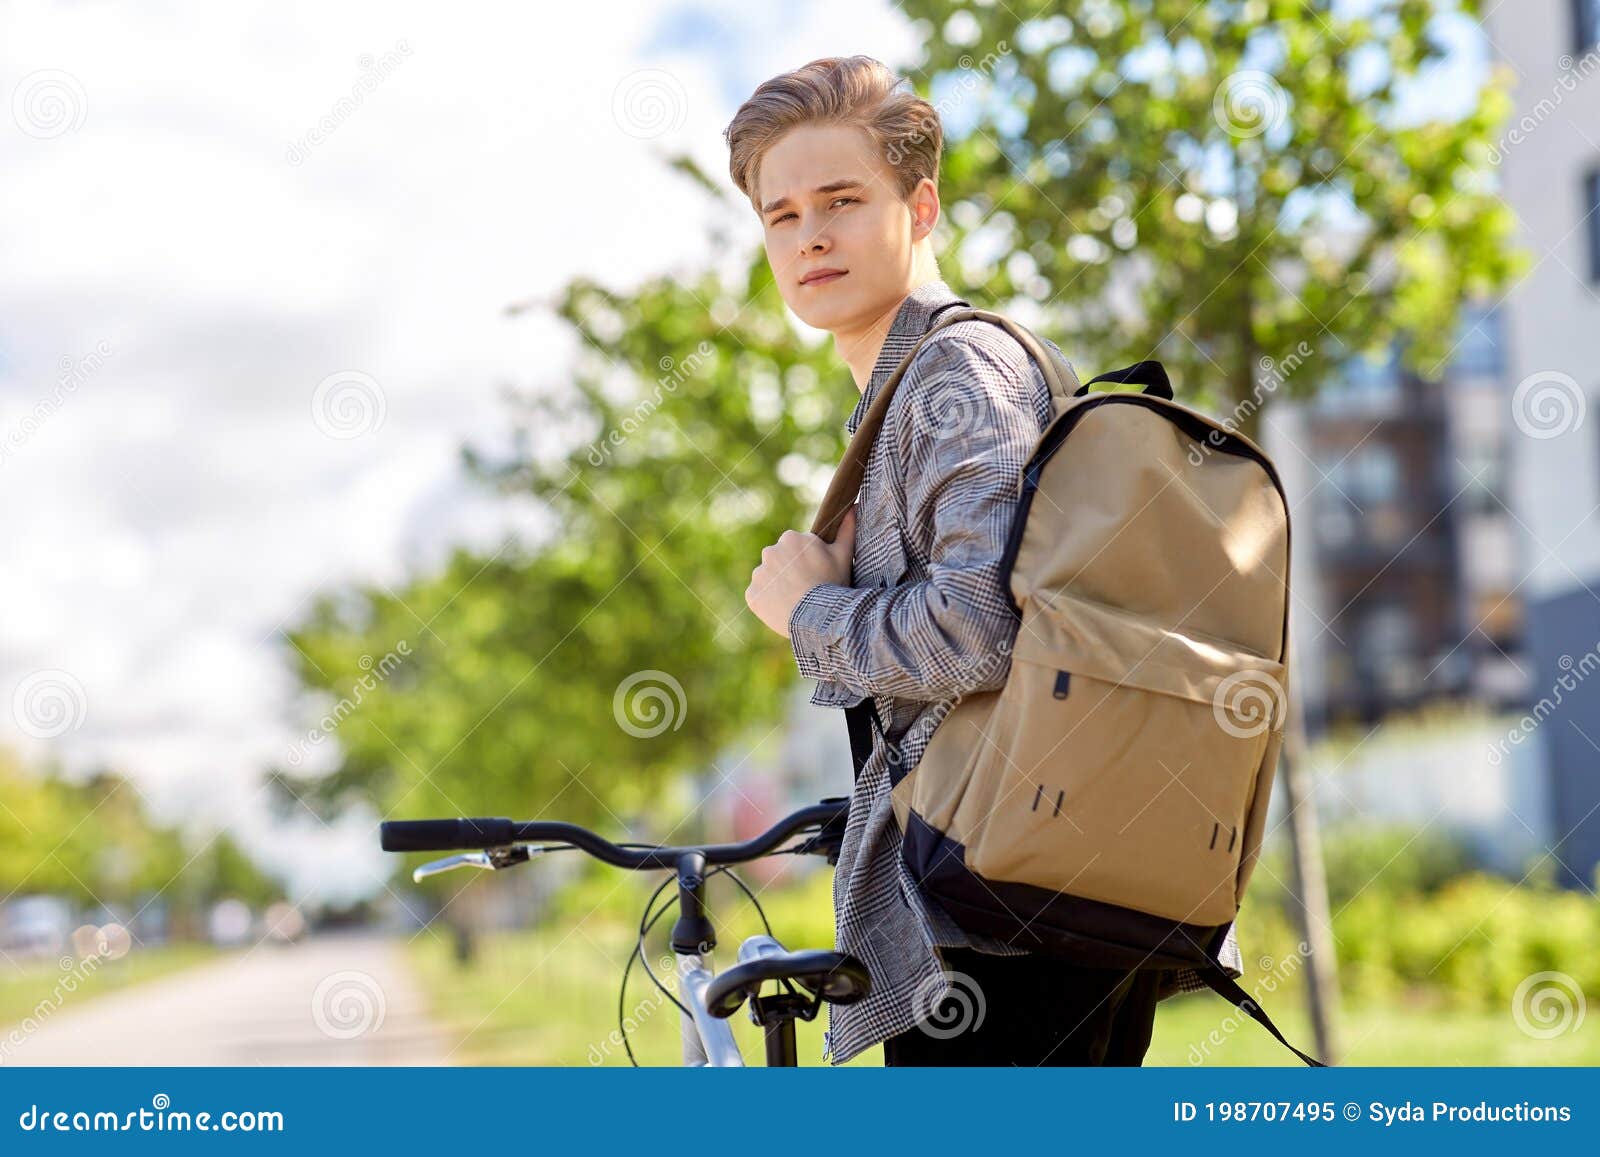 Young Man with Bicycle and Backpack on City Street Stock Image - Image ...